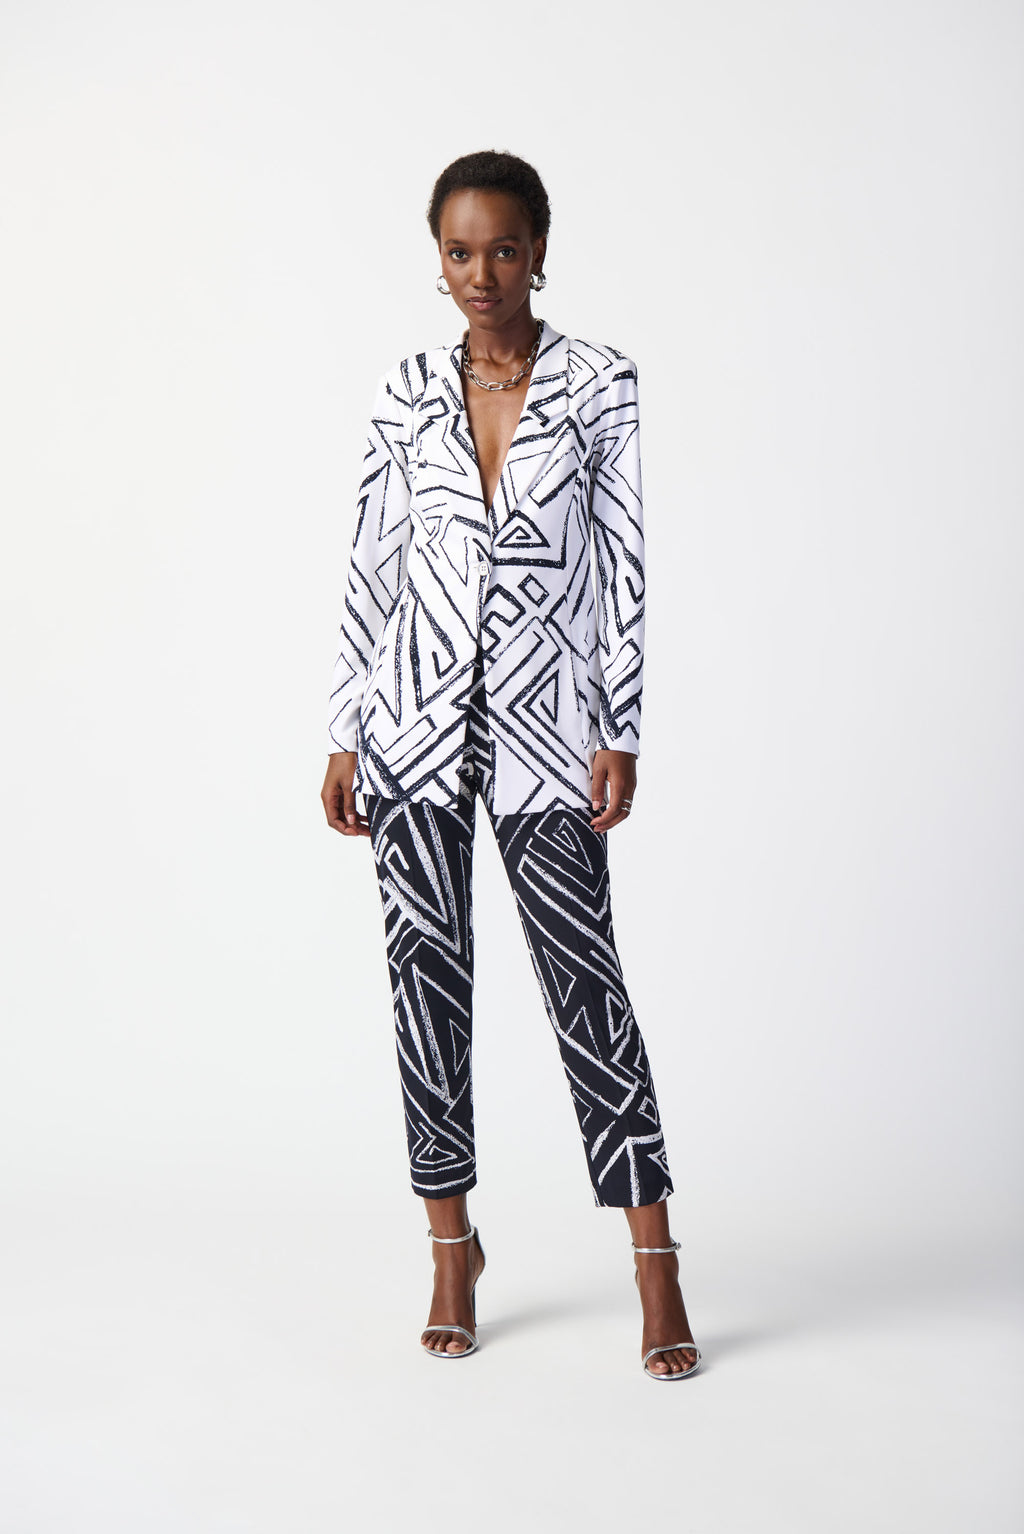 Elevate your look with this vibrant abstract print blazer. Tailored in silky knit fabric, this piece blends style and simplicity effortlessly by pairing a bold, boxy silhouette with a beautiful, notched collar.